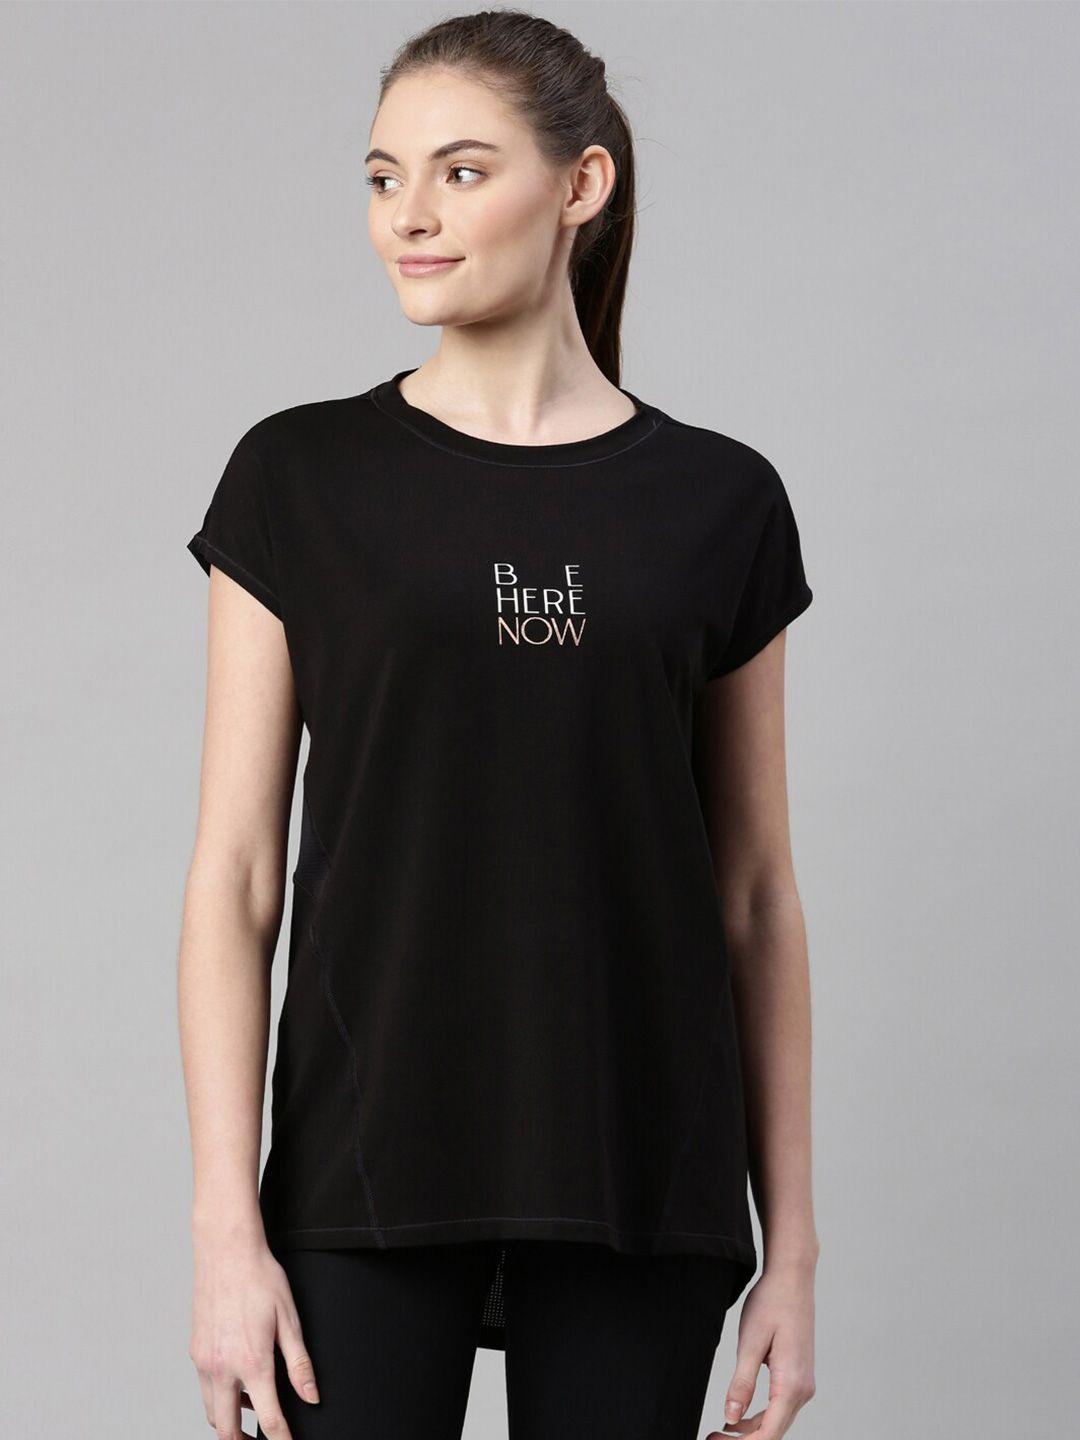 enamor-women-black-typography-extended-sleeves-antimicrobial-t-shirt